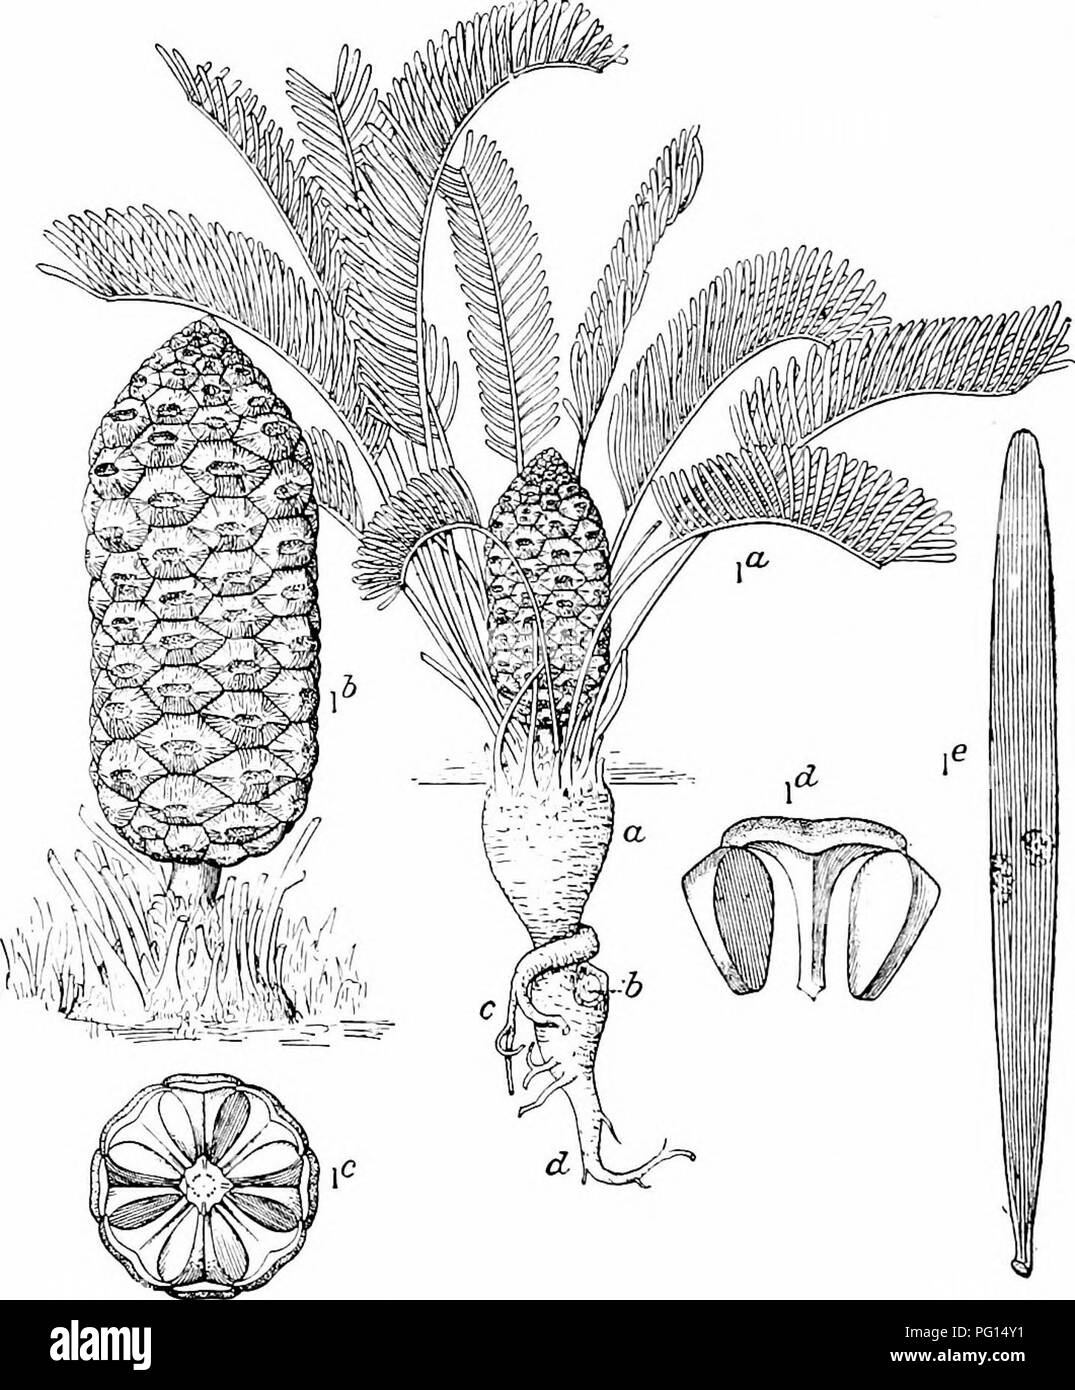 . Fossil plants : for students of botany and geology . Paleobotany. 24 CYCADALES [CH. sporophylls of Ceratozamia (fig. 393, C): in Macrozamia (fig. 394) the distal ends are prolonged as tapered processes. The surface of the strobilus of Stangeria is formed by imbricate and rounded. Fig. 395. Zamia floridana. I a, complete plant; a, main trunk; b, branch-scar; c, secondary root; d, primary tap-root. (^ uat. size.) I 6, I c, megastrobilus. ( nat. size.) Id, megasporophyll. (Jnat. size.) I e, pinna. (J nat. size. After Wieland.) ends of sporophyUs (fig. 392, H) not unlike the cone-scales of Pinu Stock Photo